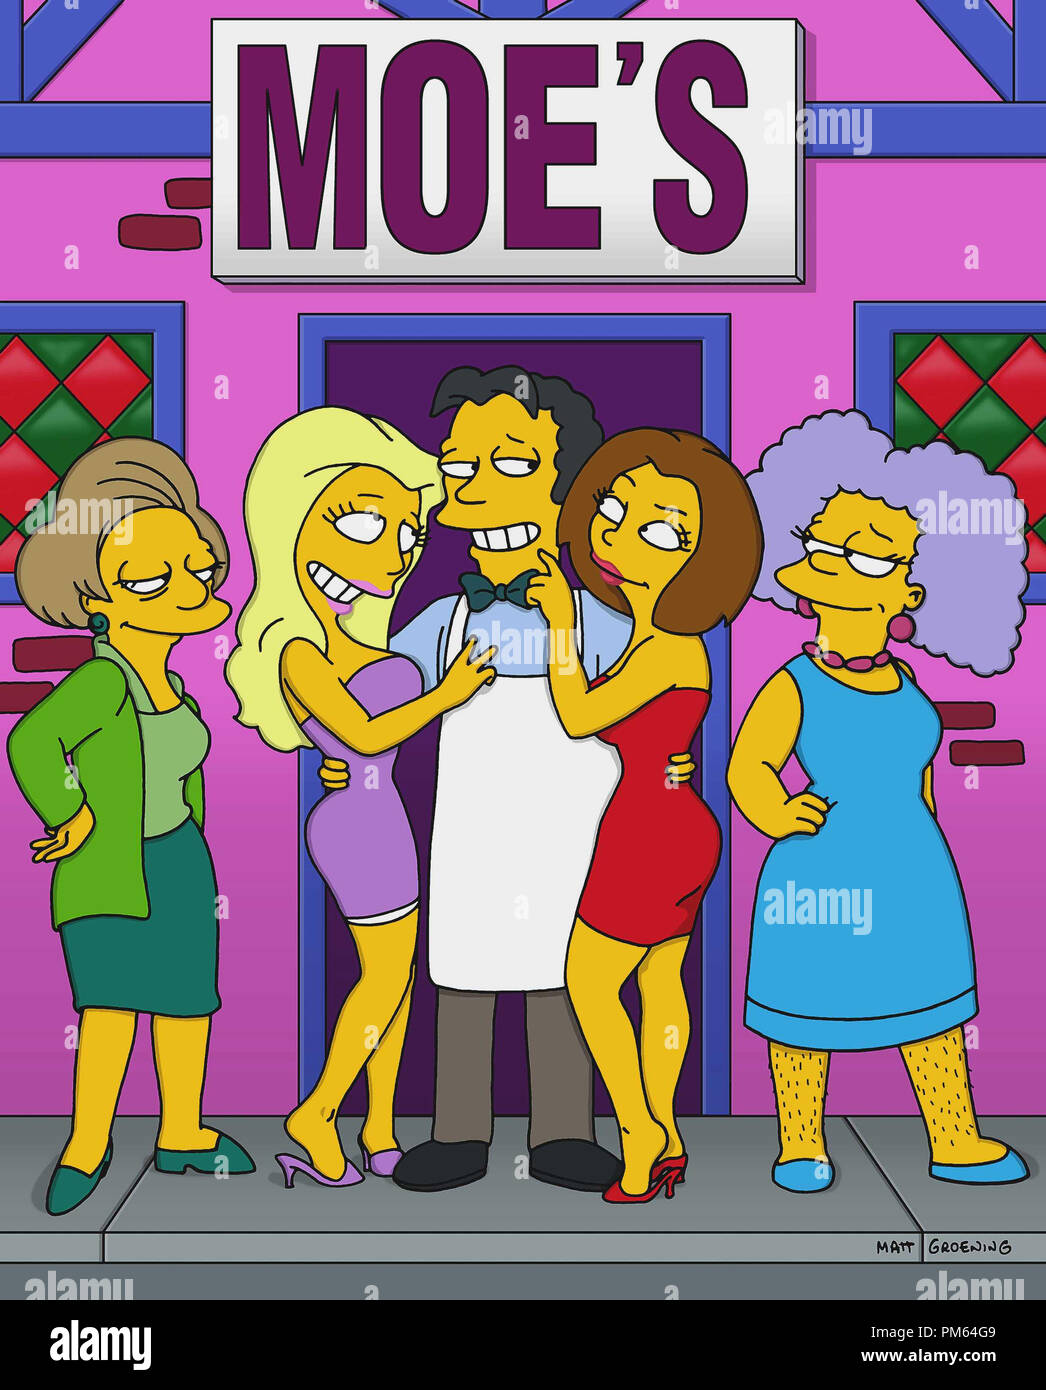 Film Still / Publicity Stills from "The Simpsons" Episode: 'Pygmoelian'  Edna Krabappel, Moe, Selma Bouvier February 27, 2000 File Reference #  30846101THA For Editorial Use Only - All Rights Reserved Stock Photo - Alamy